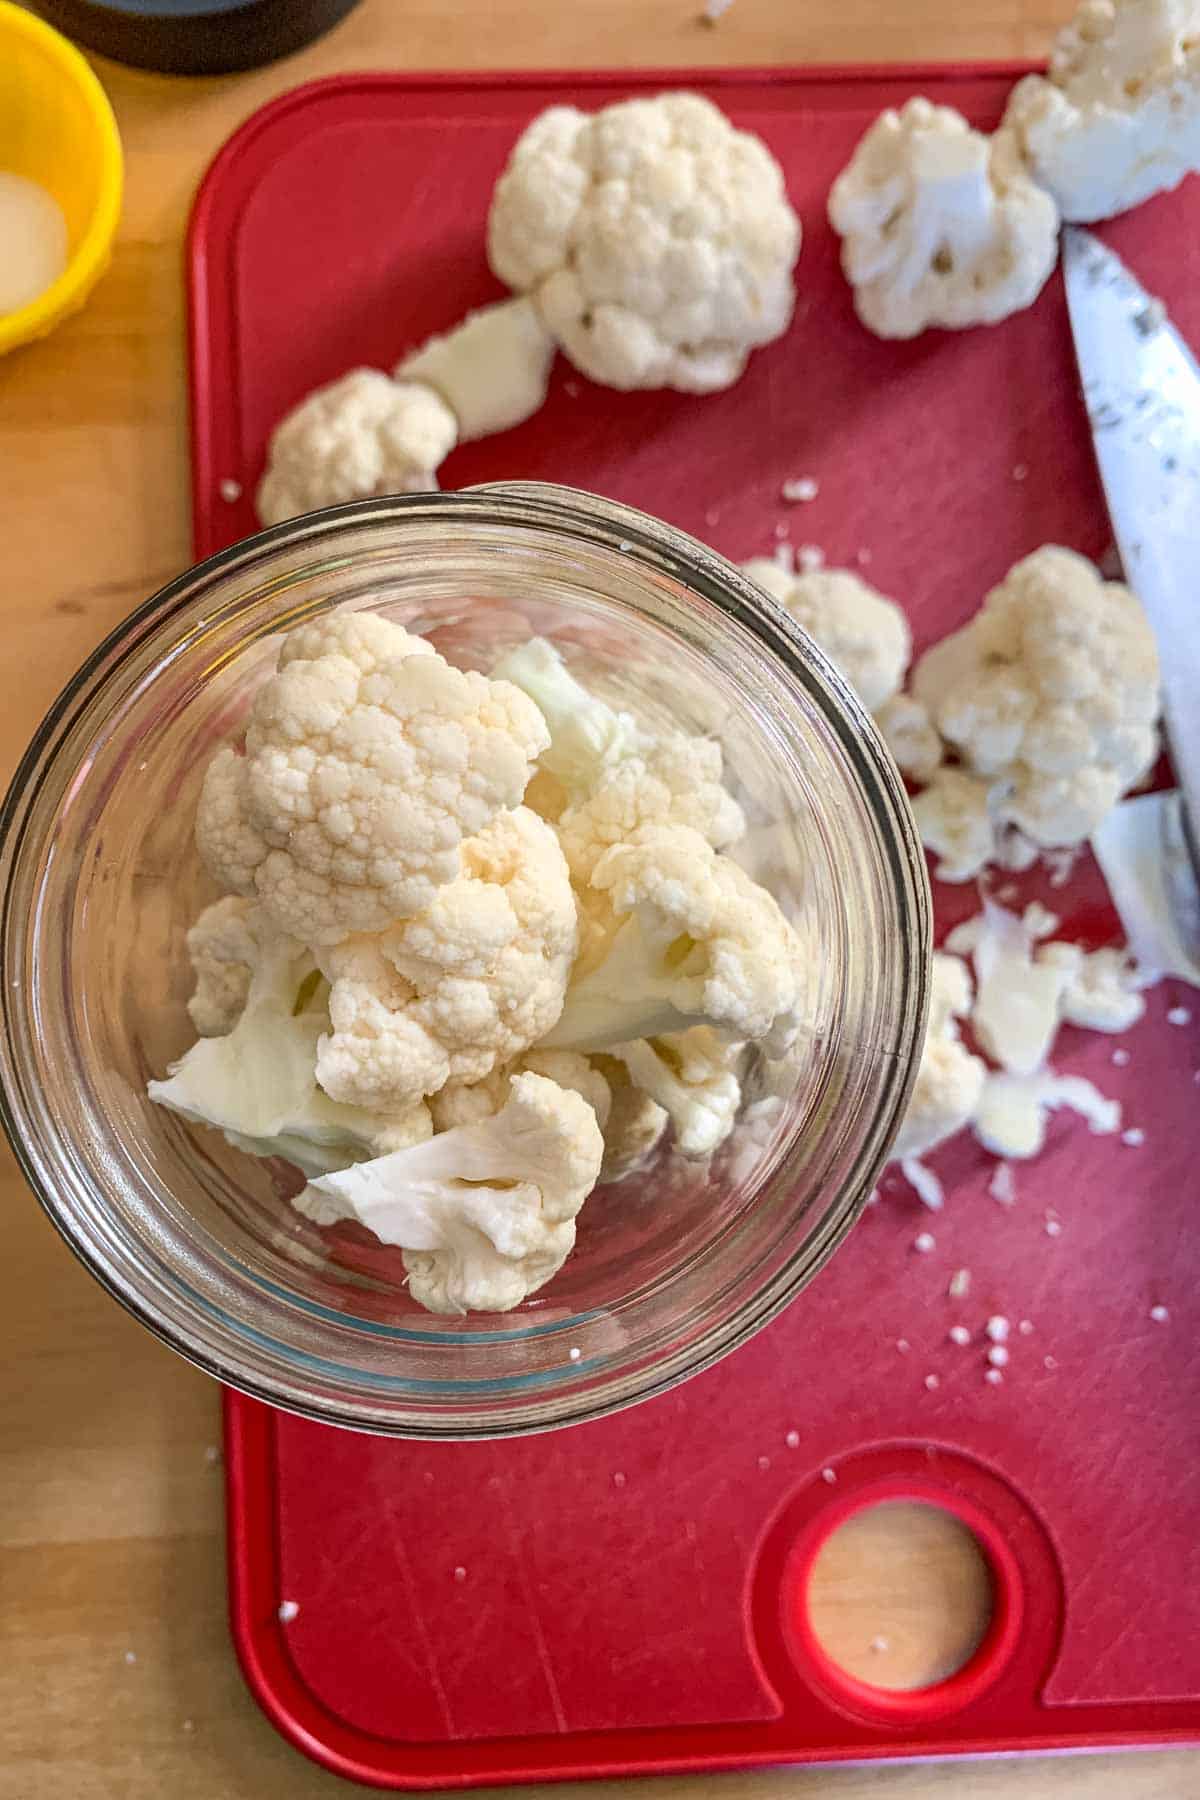 Jar filled with cauliflower pieces for pickling.